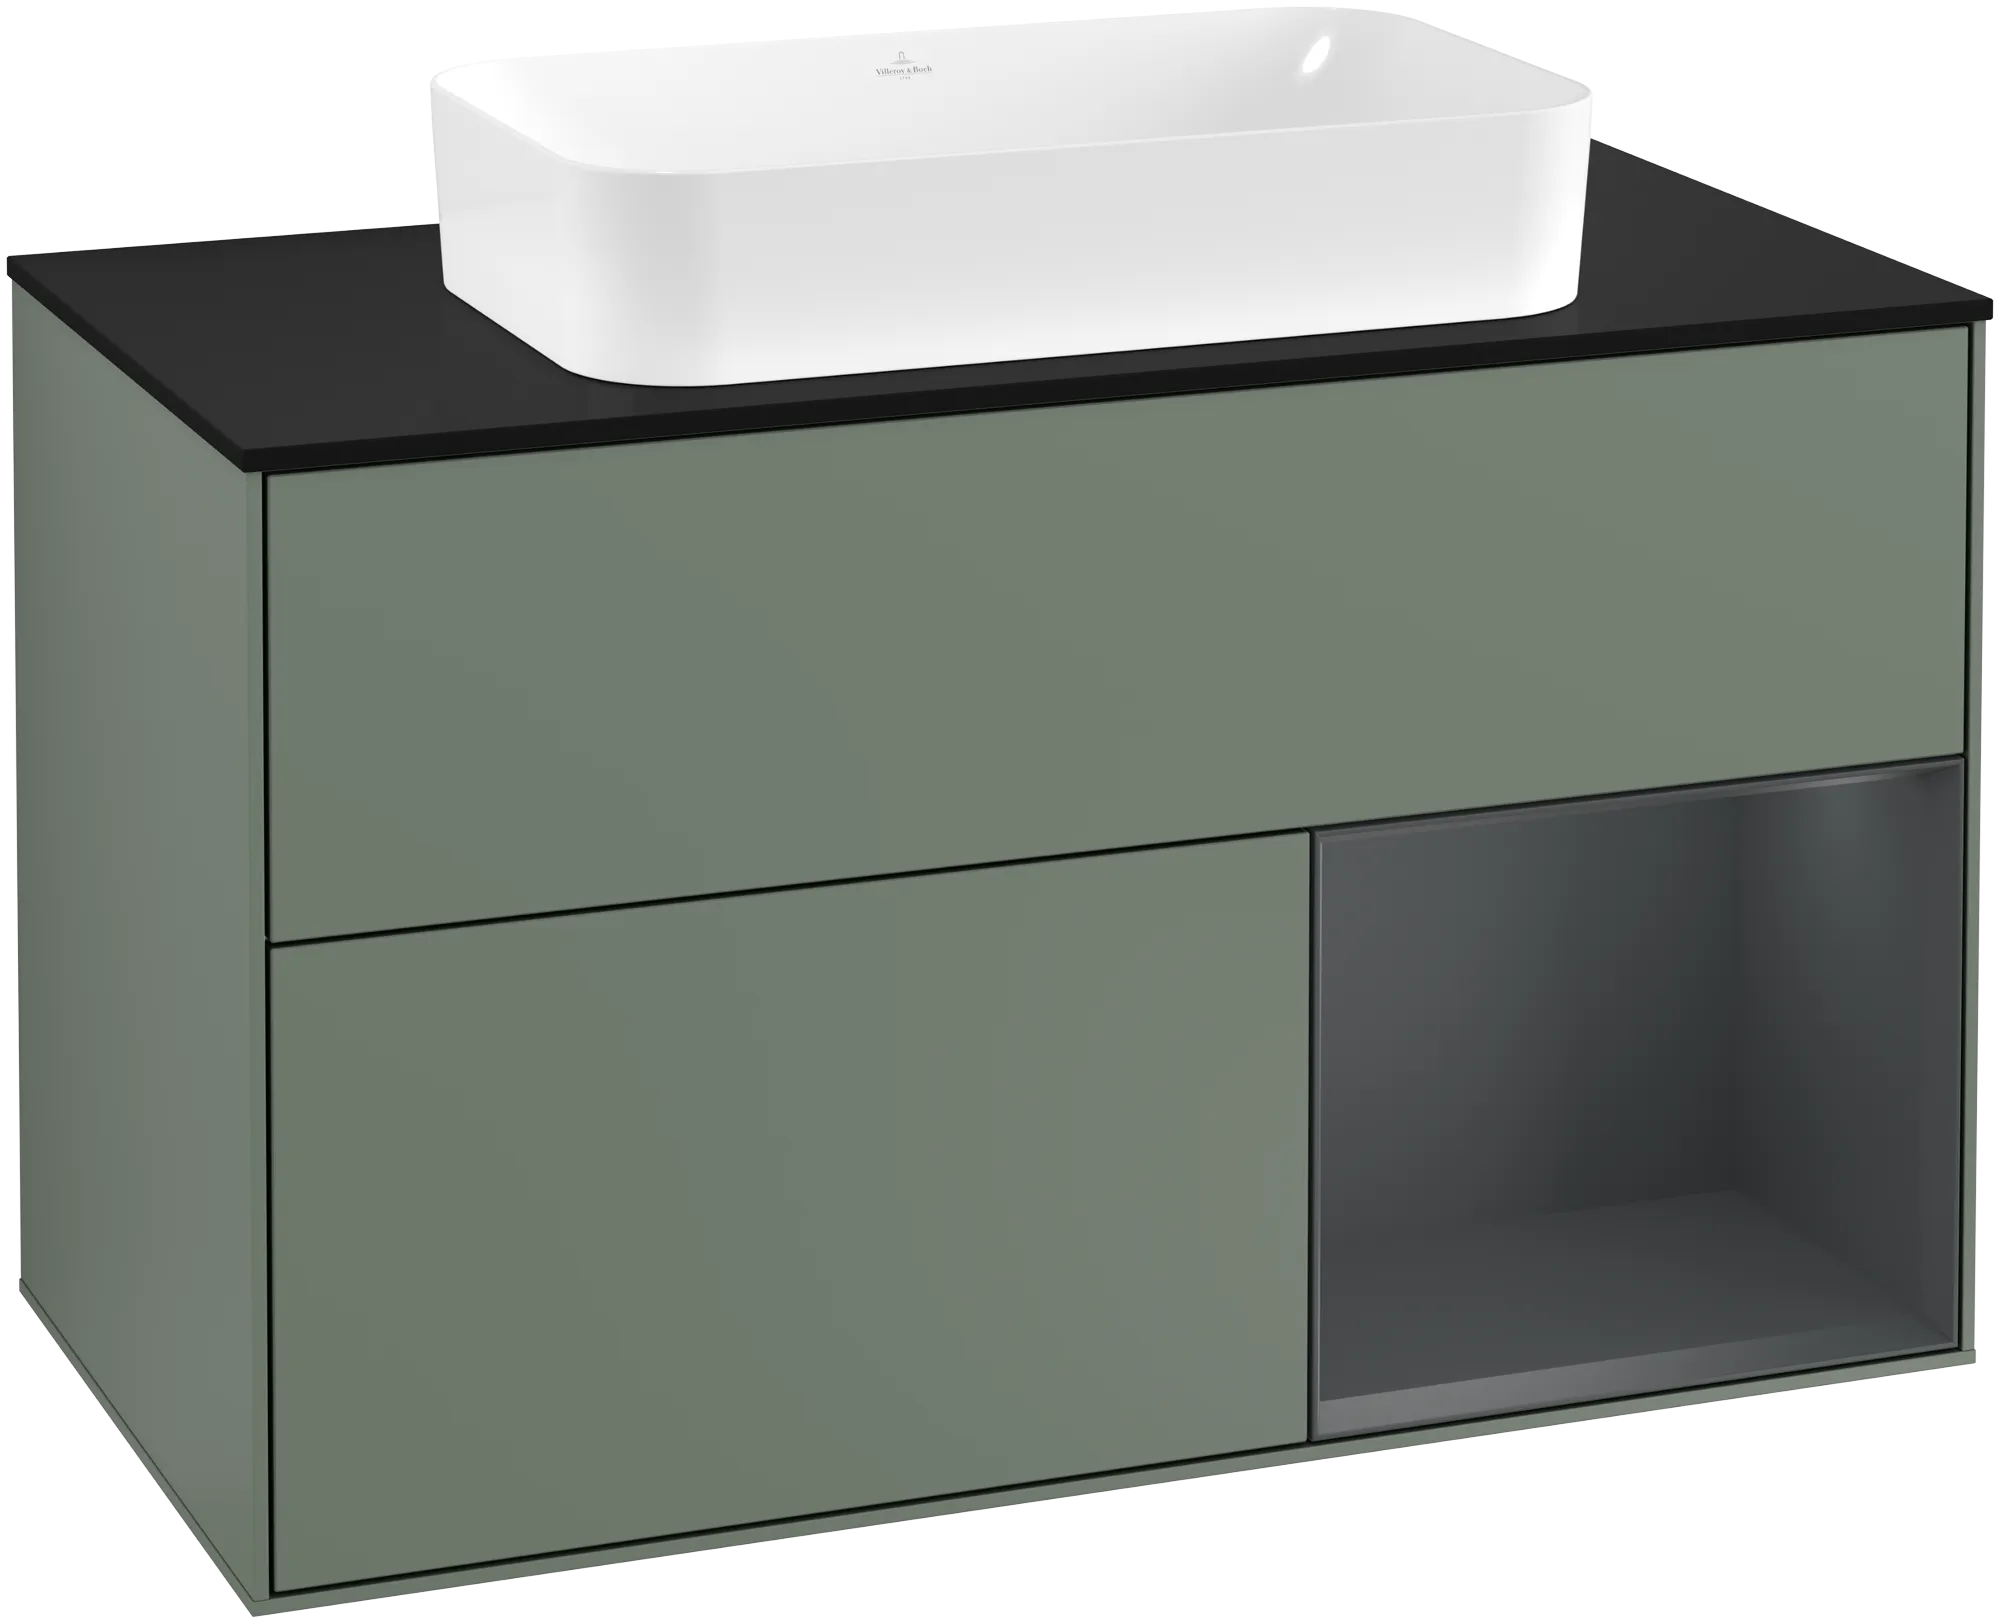 Picture of VILLEROY BOCH Finion Vanity unit, with lighting, 2 pull-out compartments, 1000 x 603 x 501 mm, Olive Matt Lacquer / Midnight Blue Matt Lacquer / Glass Black Matt #G252HGGM